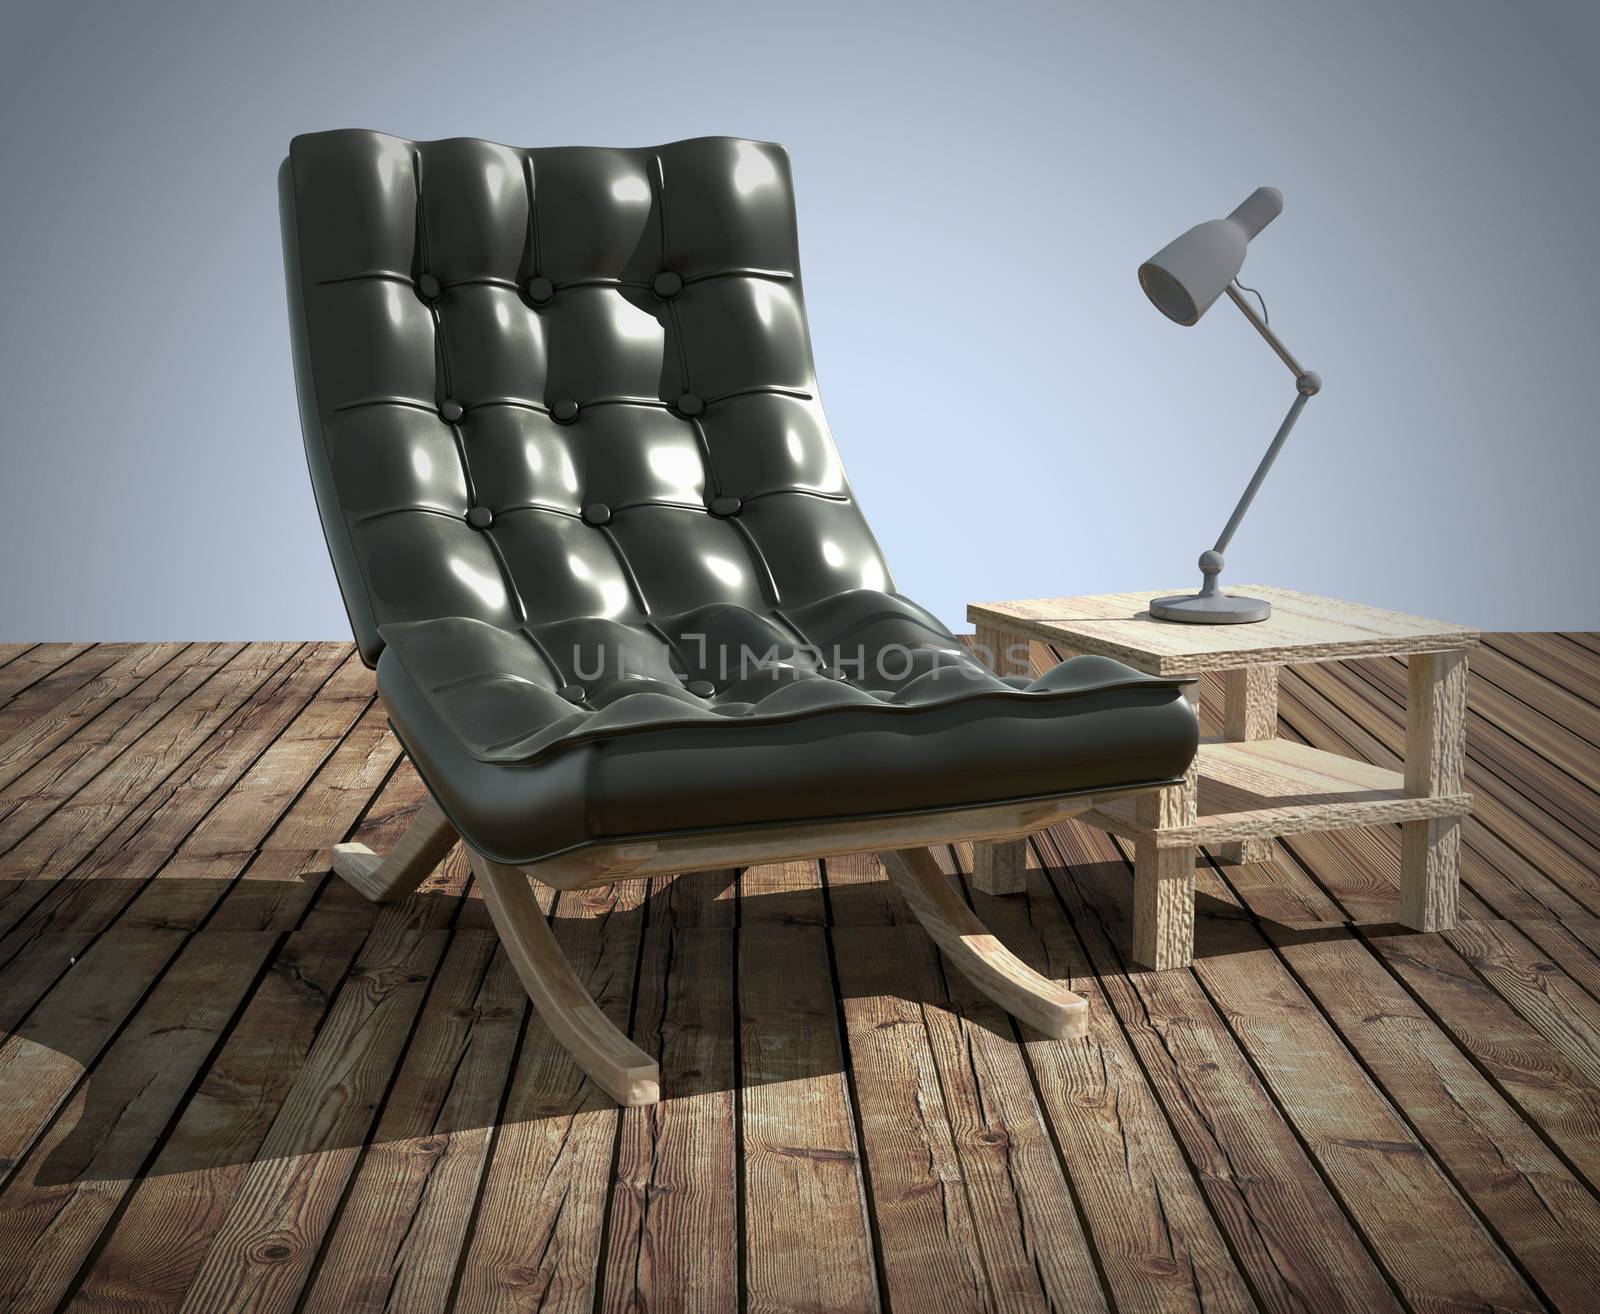 Black sofa and lamp on wooden table. 3Drendering by Minny0012011@hotmail.com